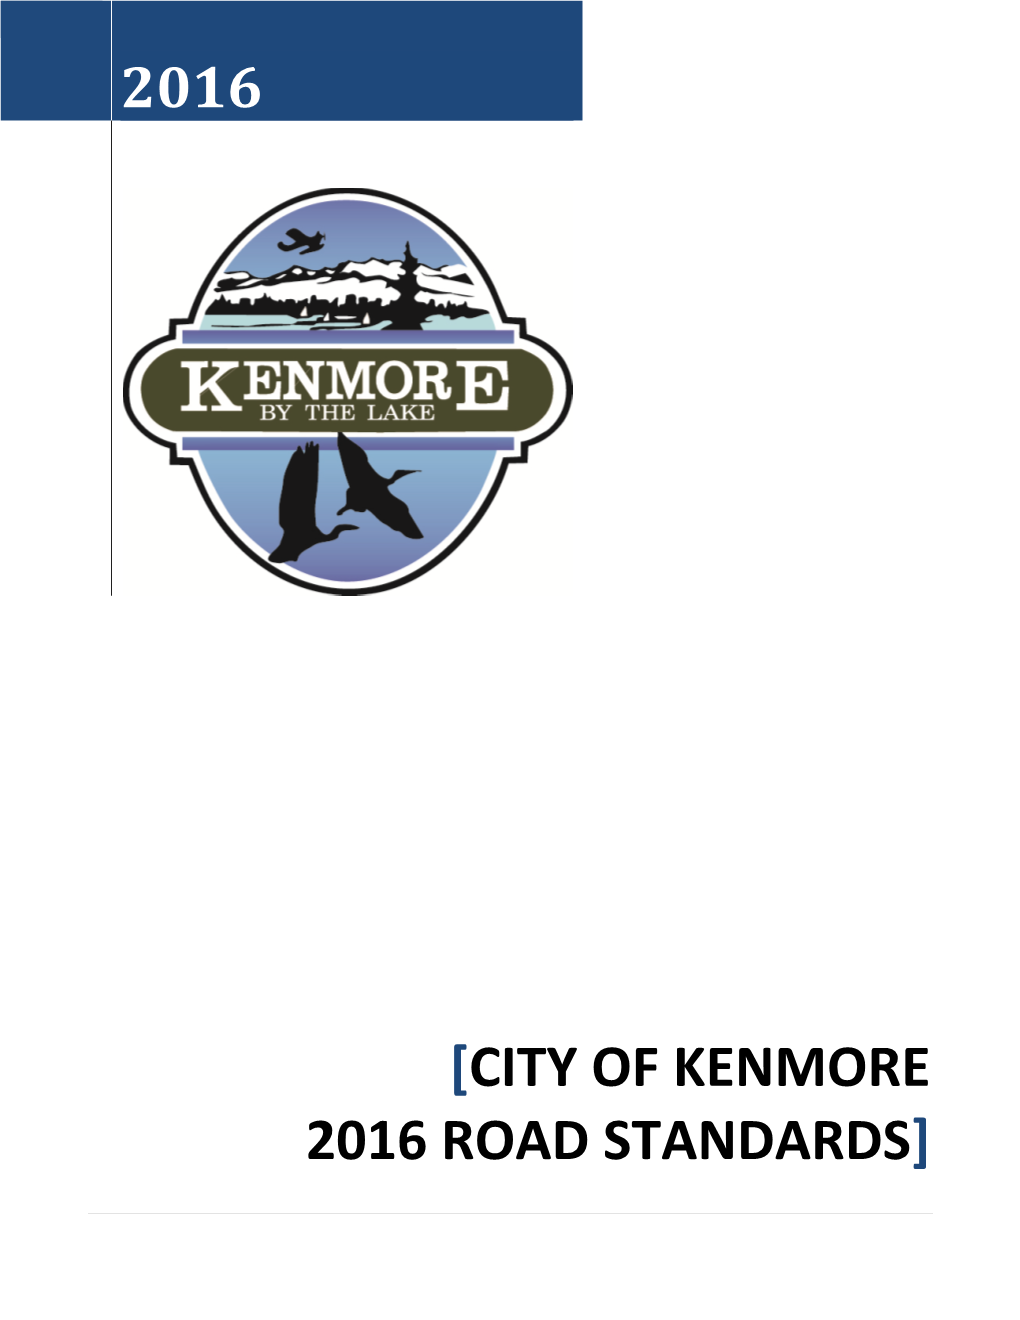 City of Kenmore 2016 Road Standards]